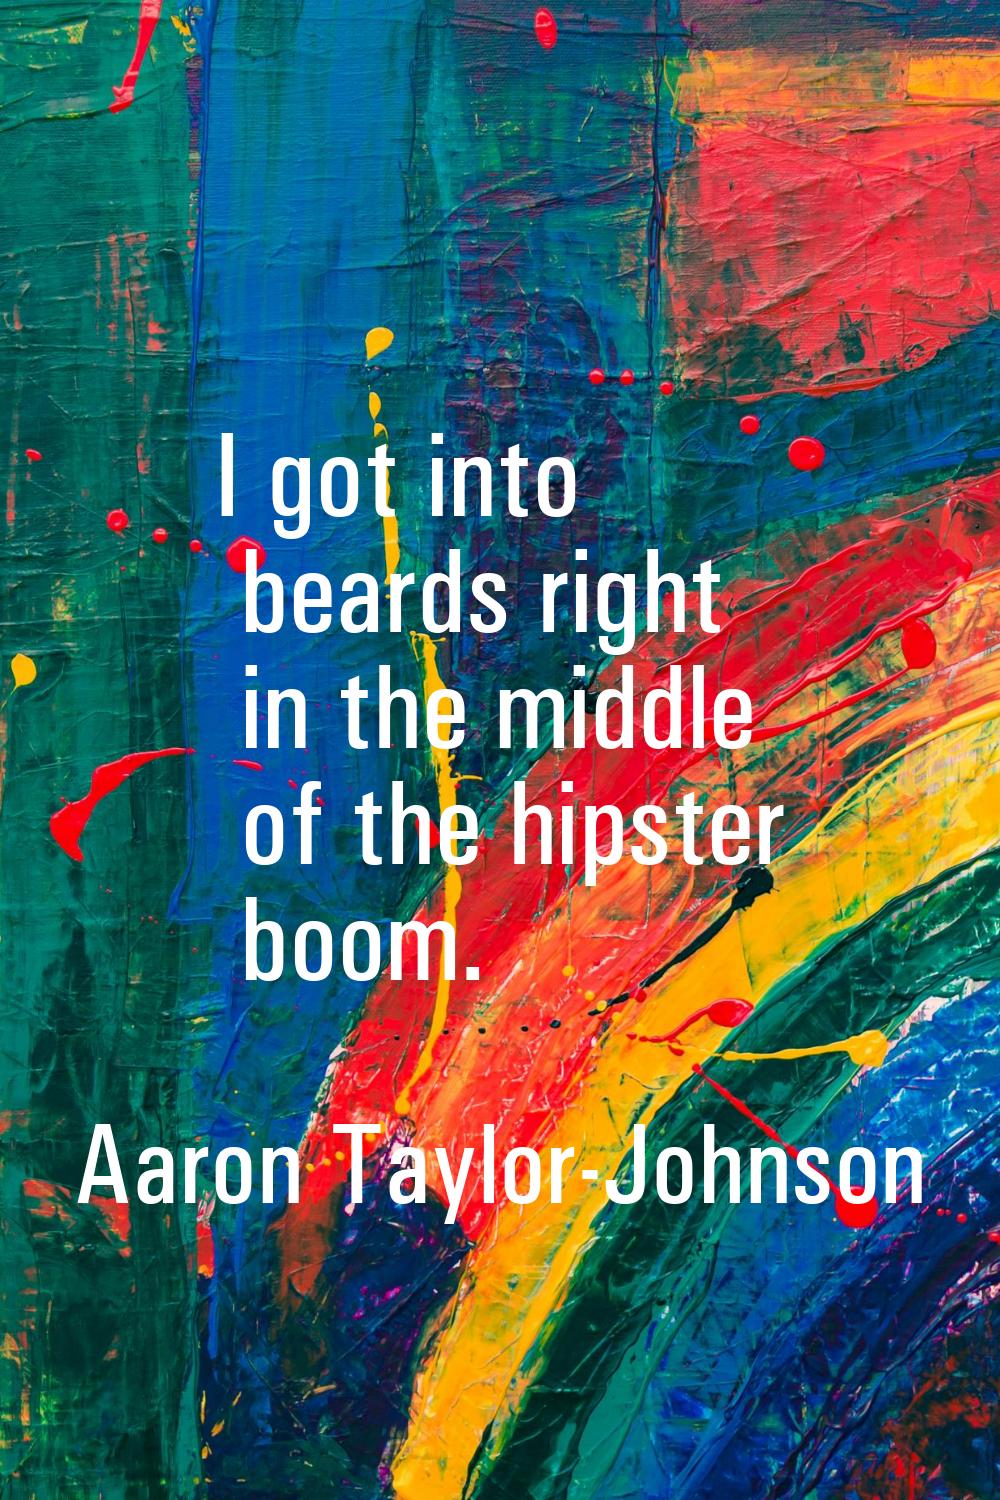 I got into beards right in the middle of the hipster boom.